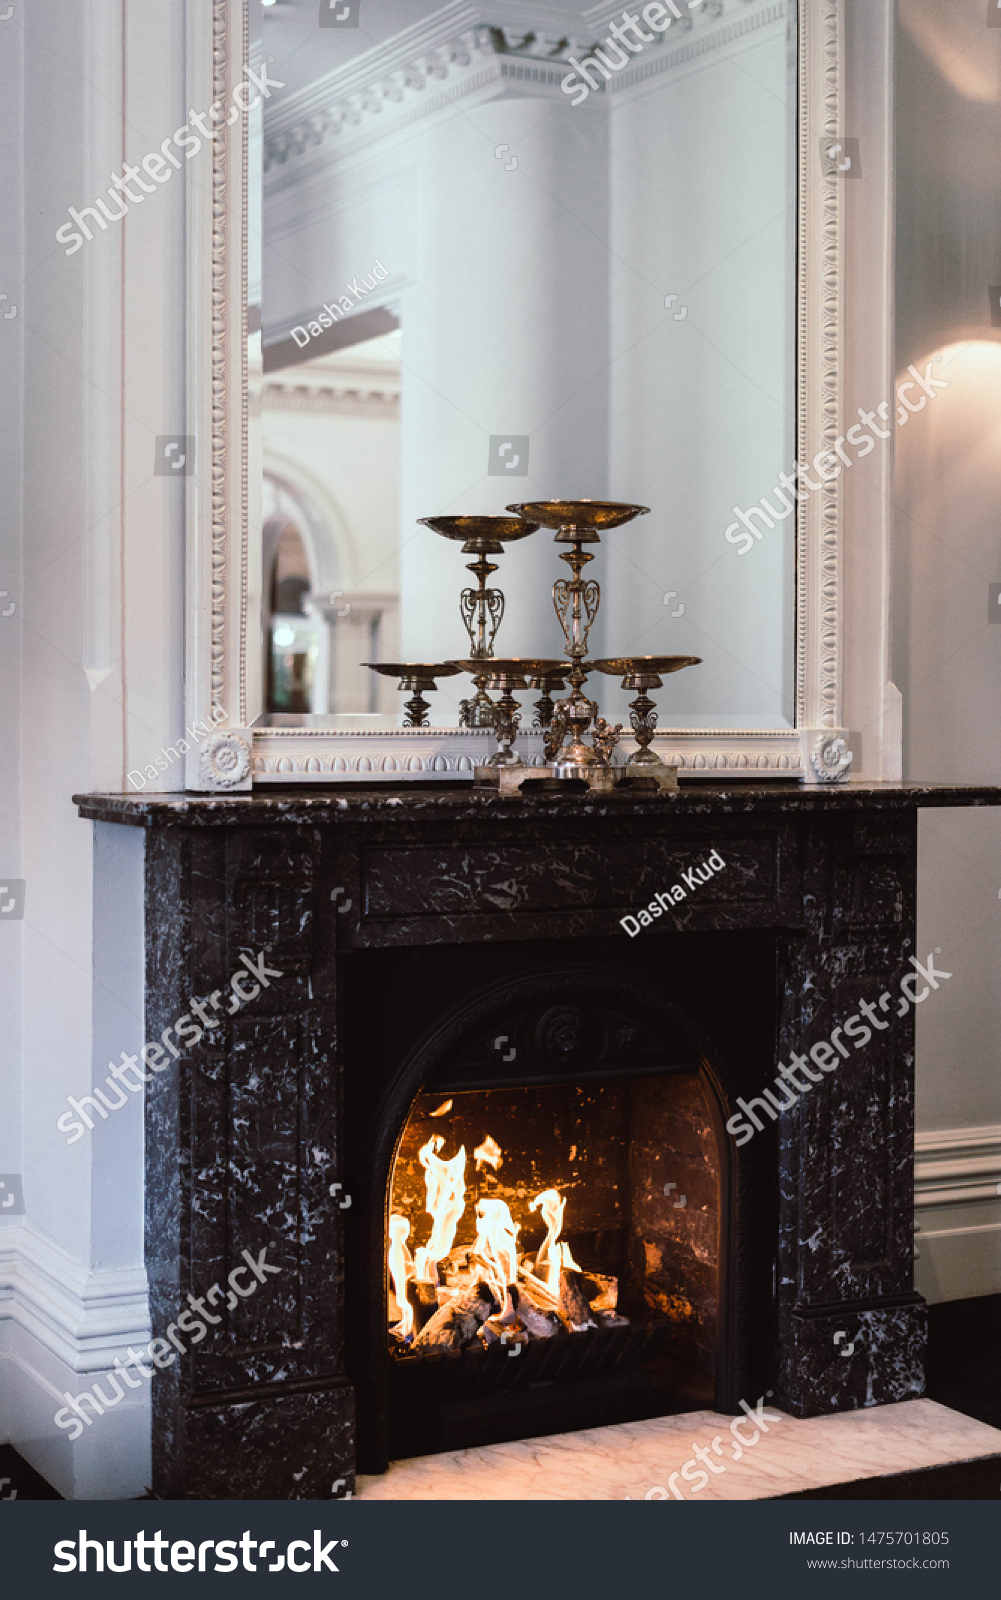 Fireplace Mirror Lovely Fireplace Mirror Older Building Stock Edit now